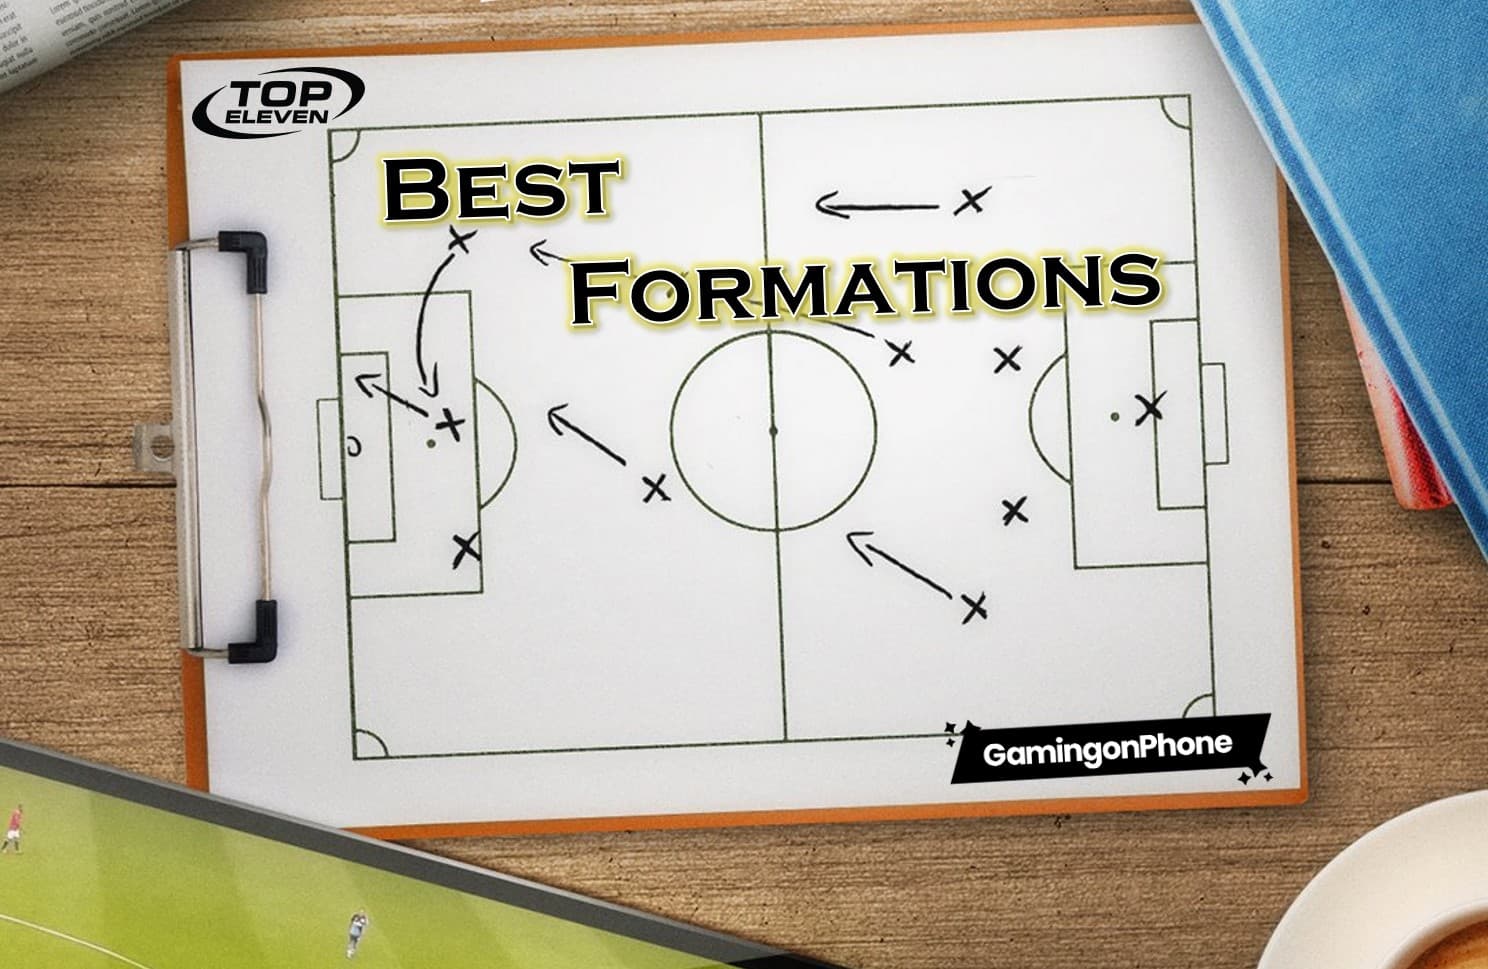 Top best formations to win most of the matches